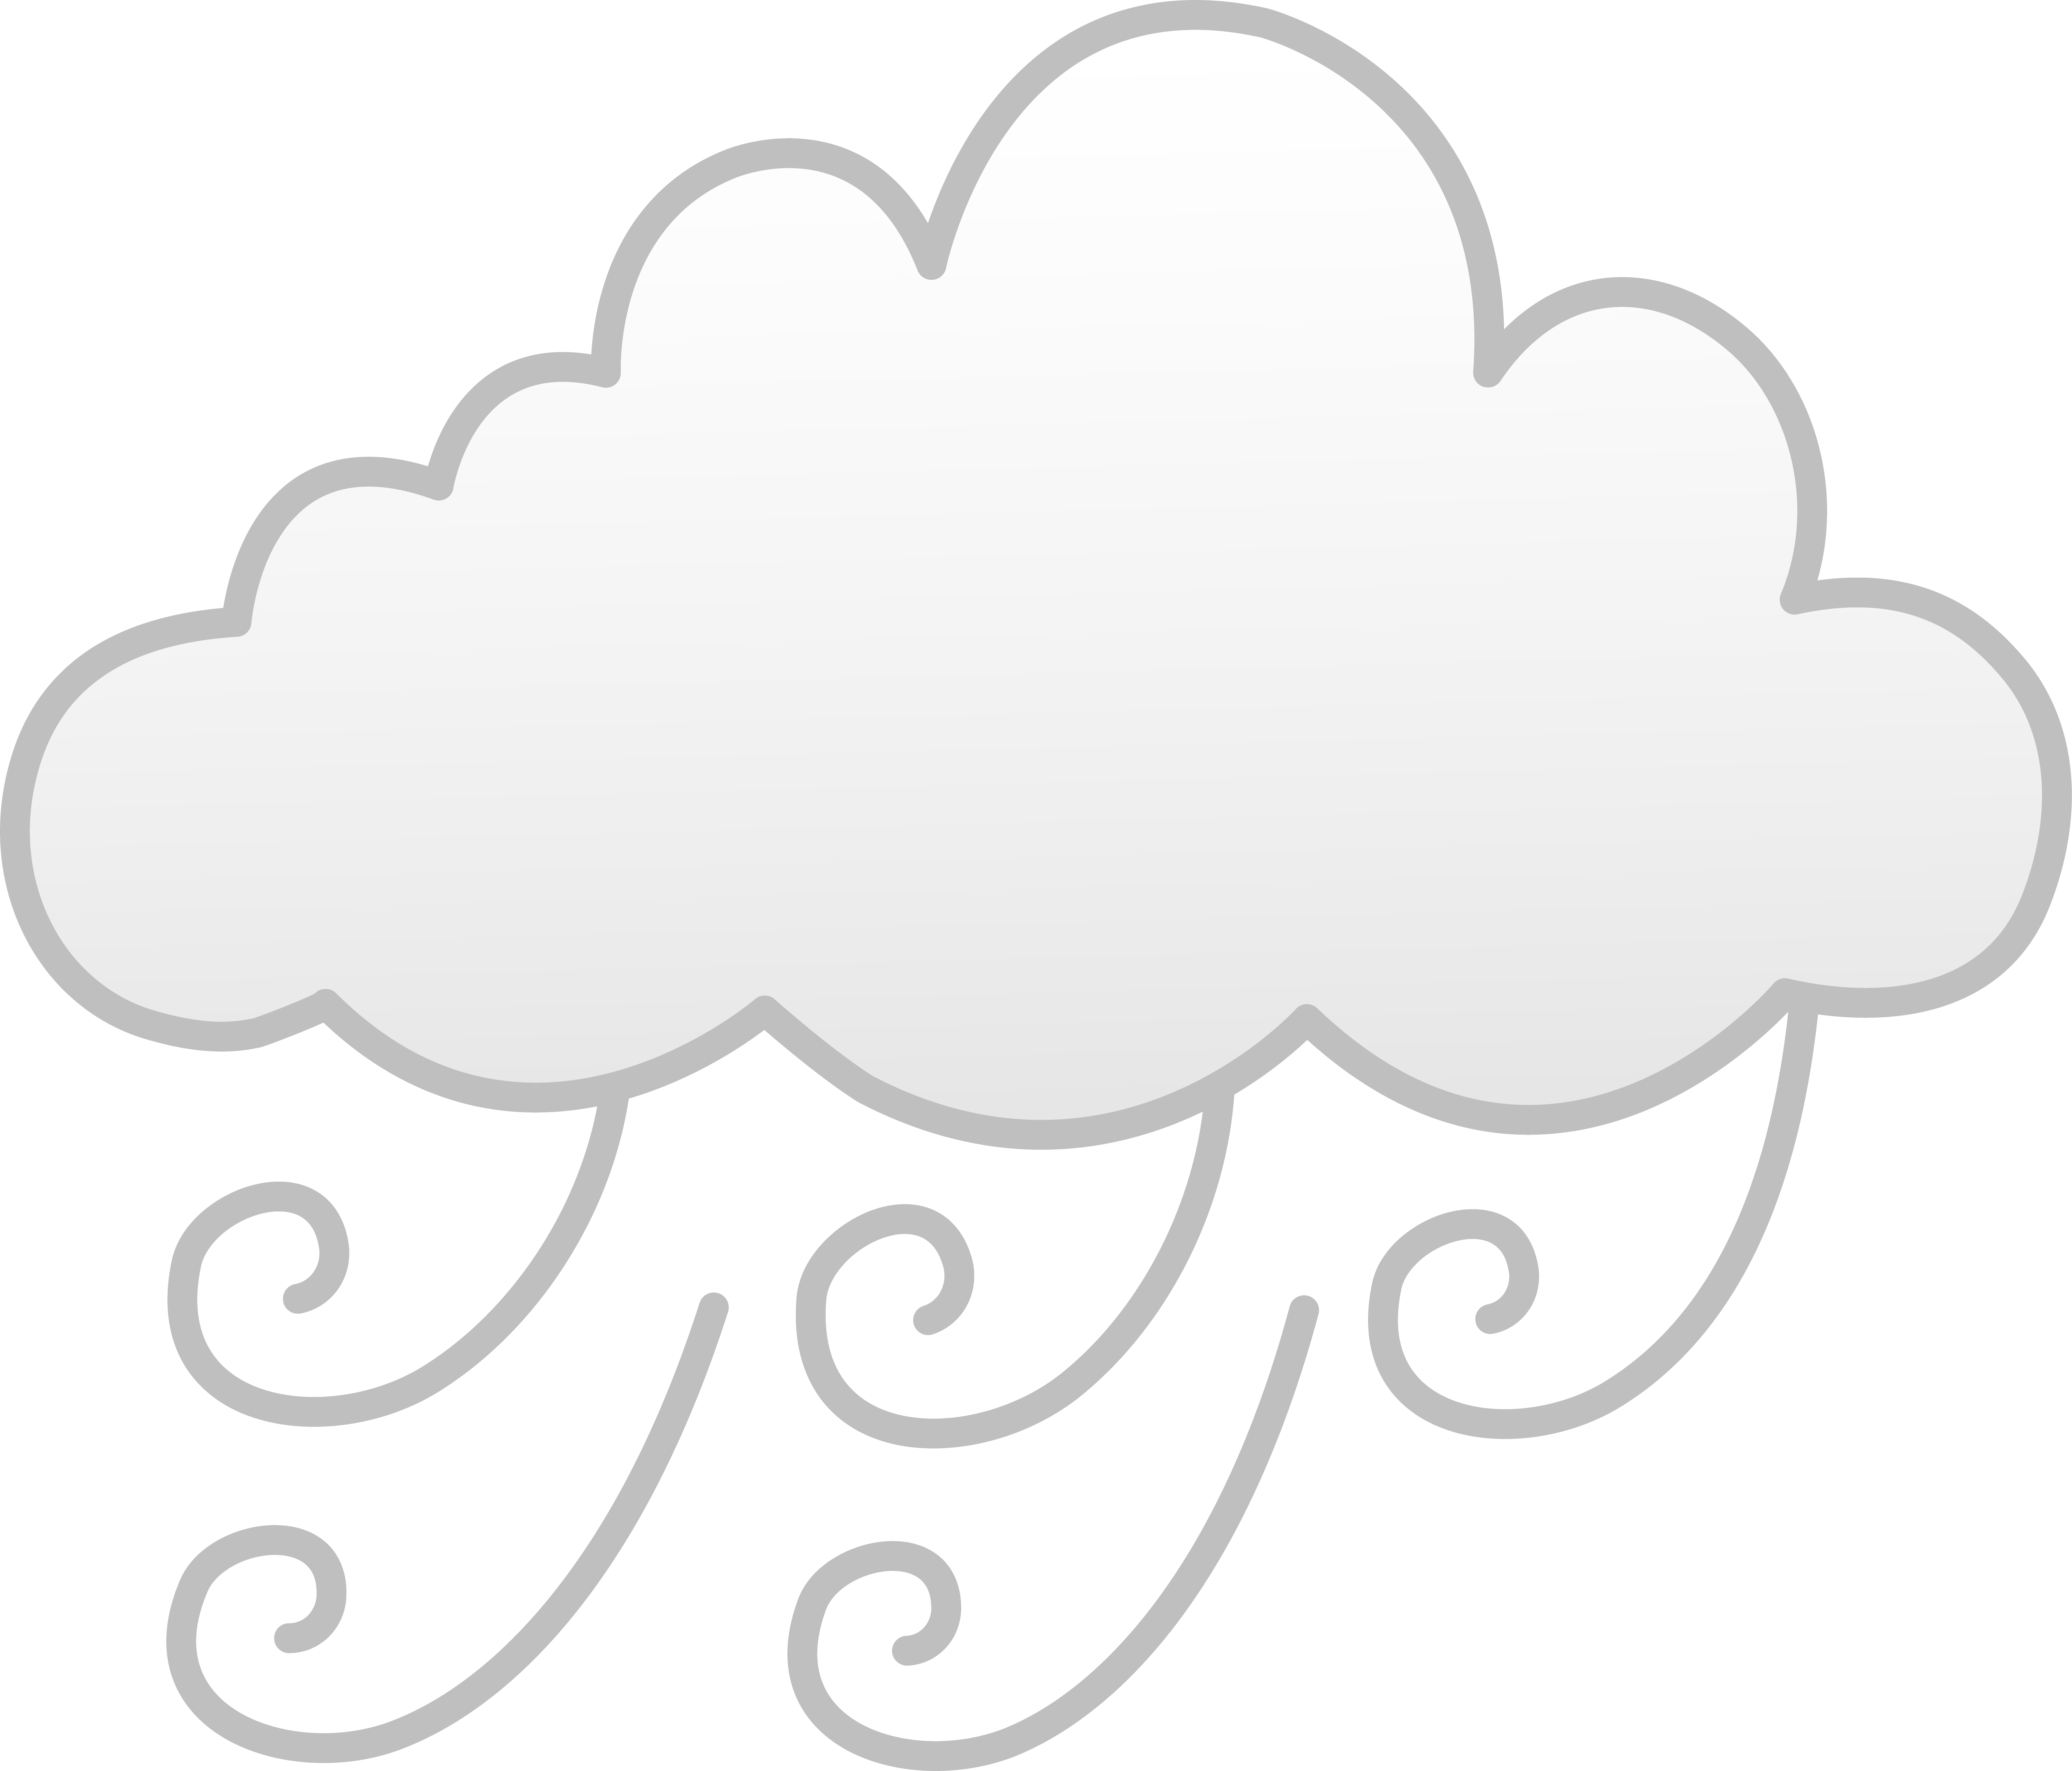 Windy or Foggy Weather Background